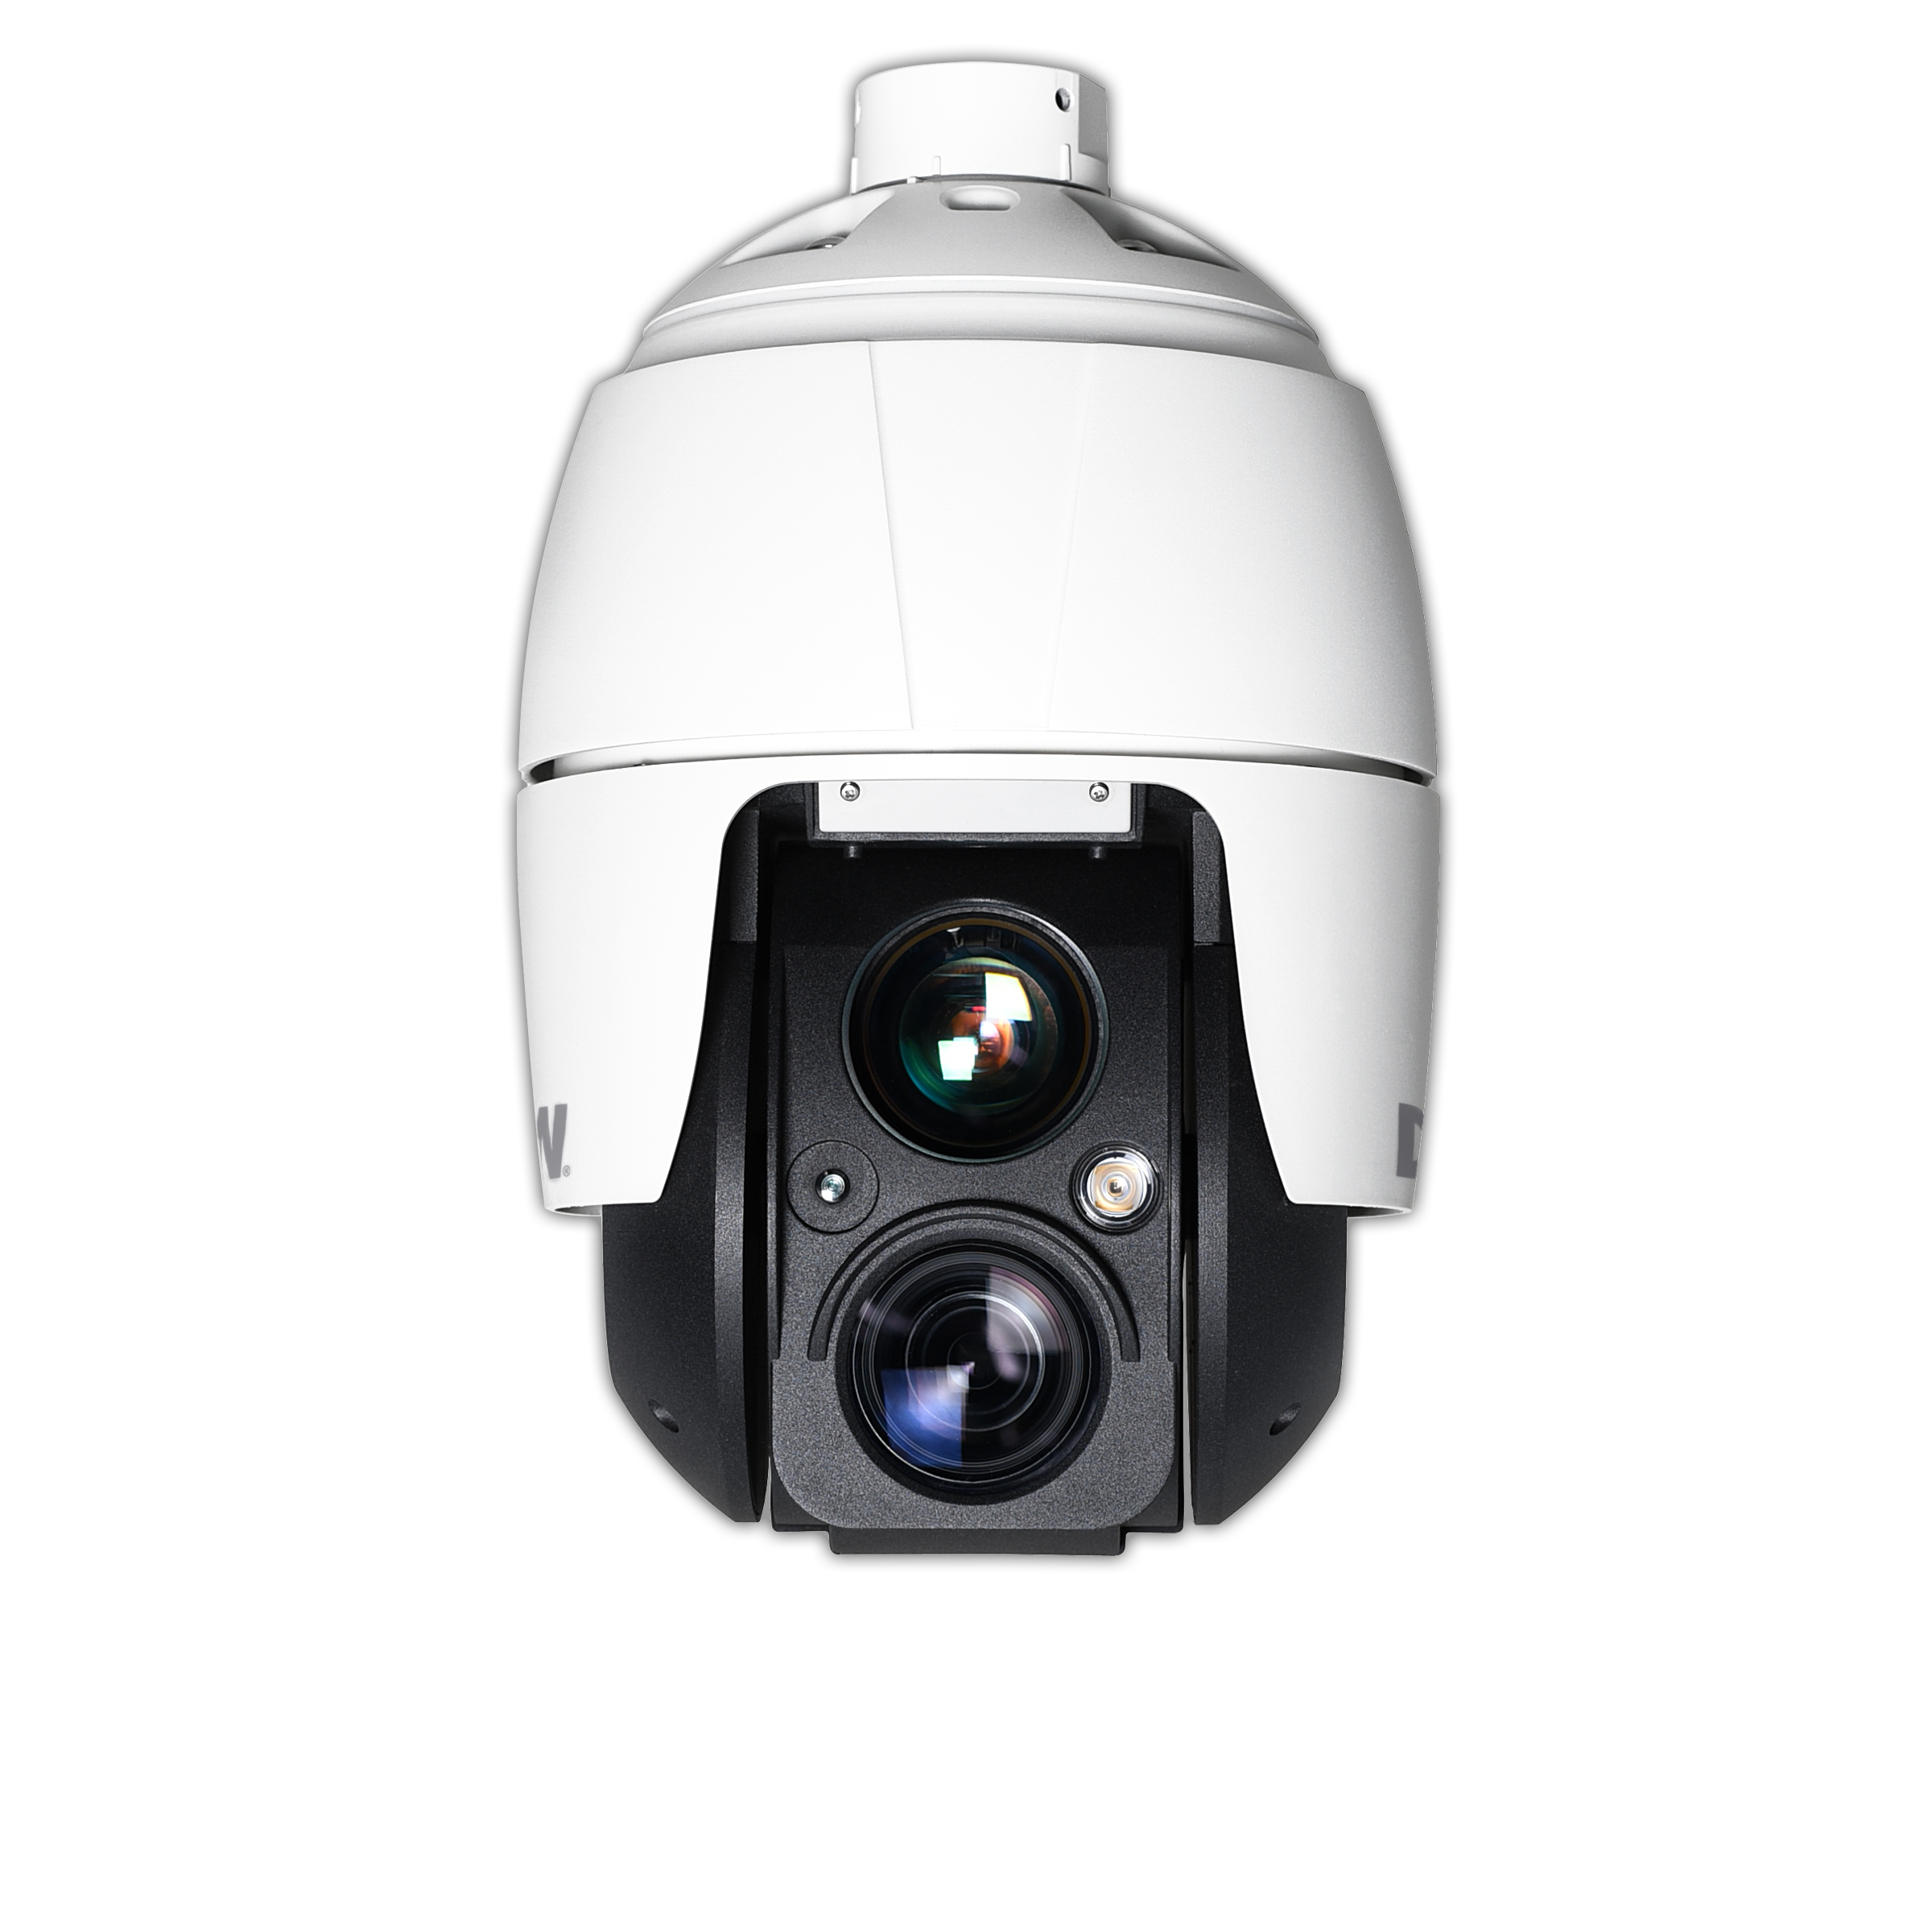 Digital Watchdog | DWC-MPTZ336XW | Megapix 3MP PTZ IP Camera | Vari-Focal Lens with Motorized Zoom and Auto Focus and 36x Optical Zoom and IR